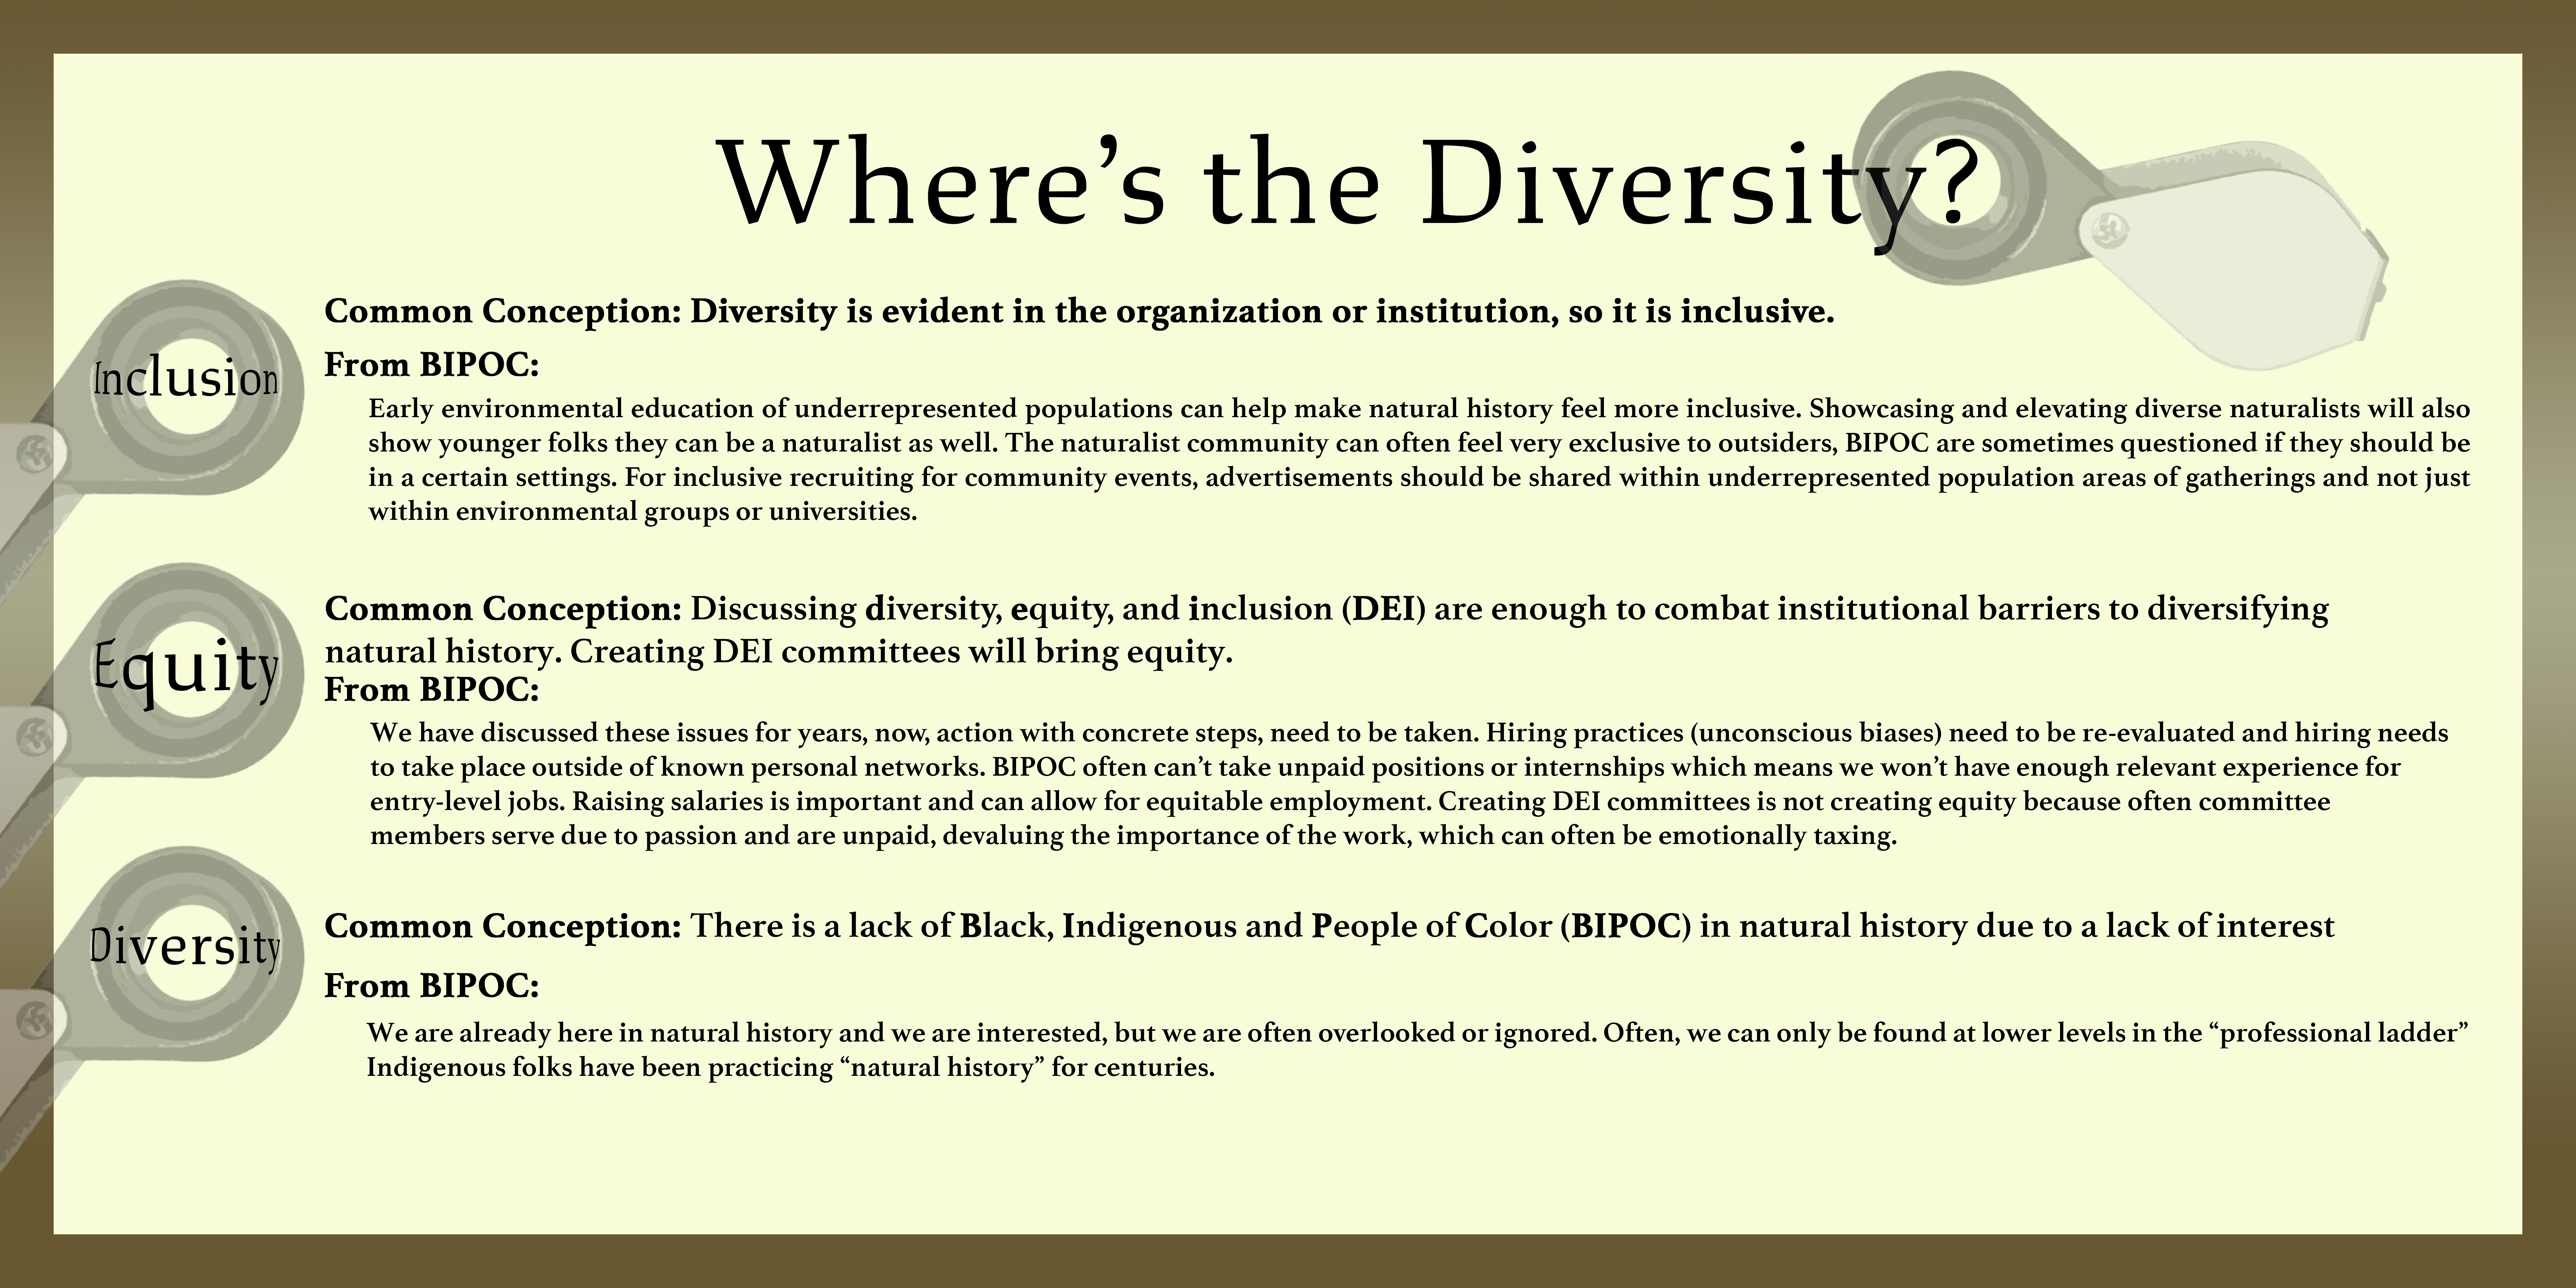 large image of text on what it means to be diverse, inclusive, and equitable in natural history